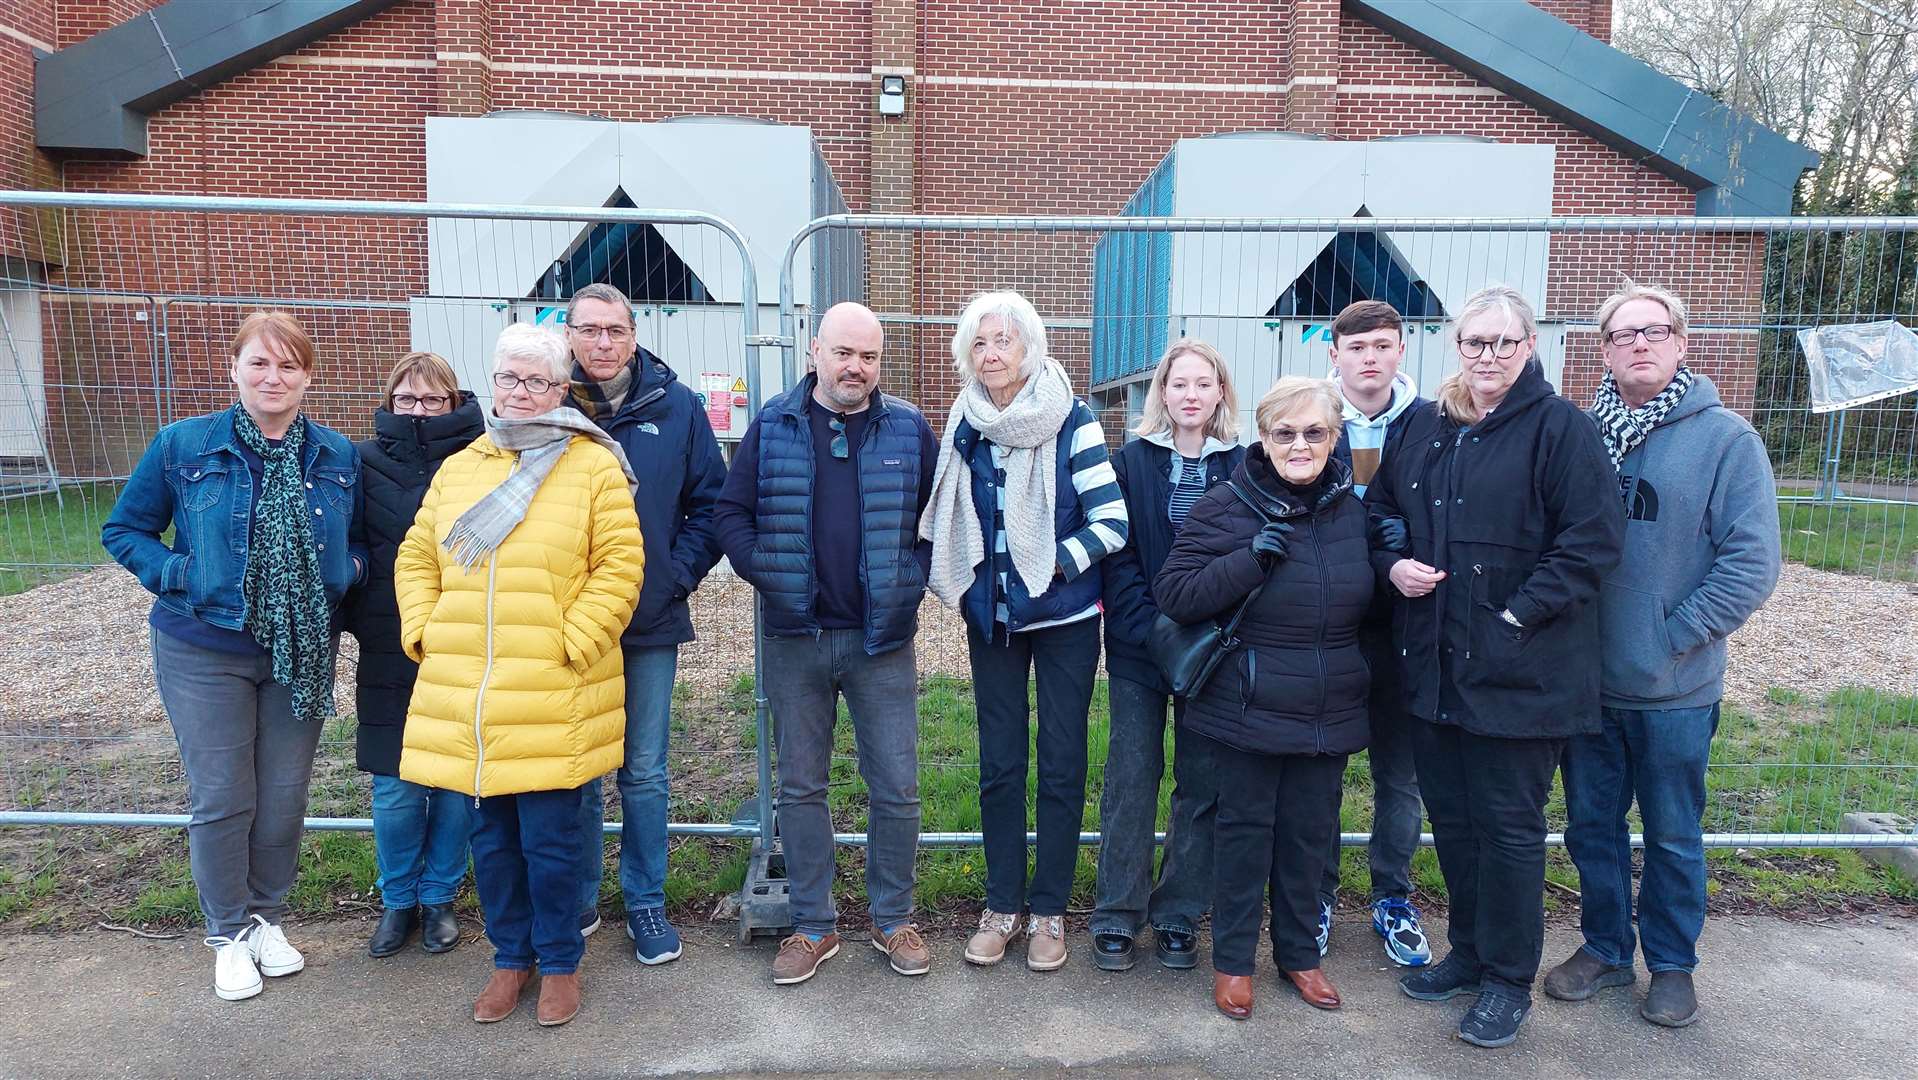 Mercer Drive residents say the noise coming from Tenterden Leisure Centre is disrupting their sleep